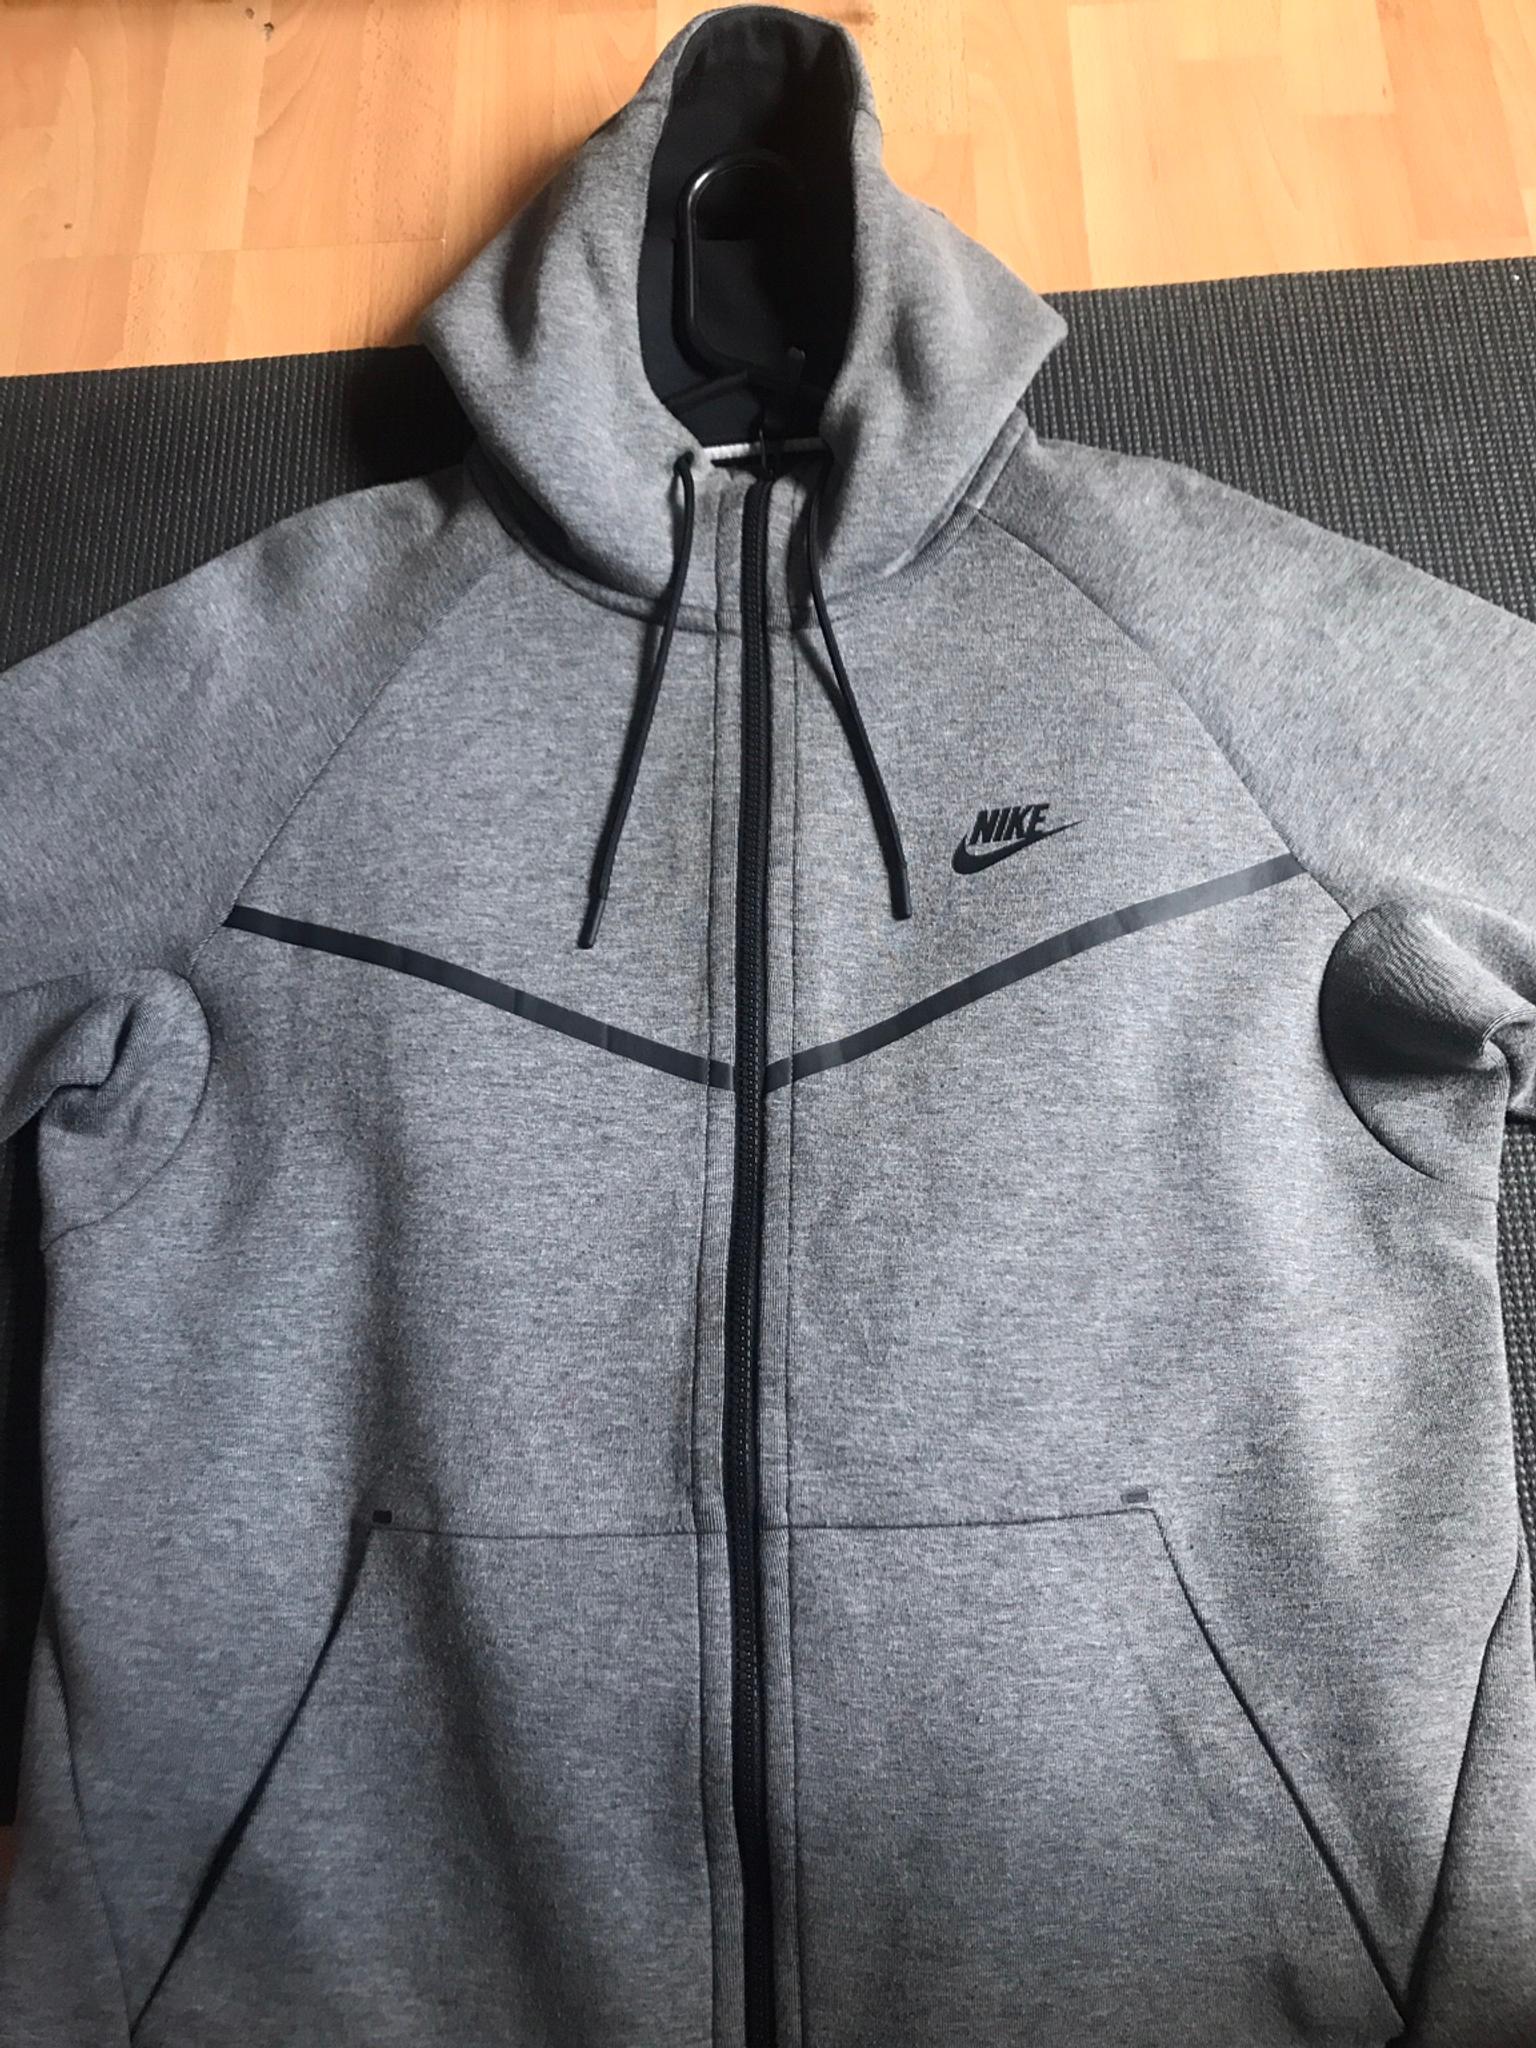 old nike tech tracksuit